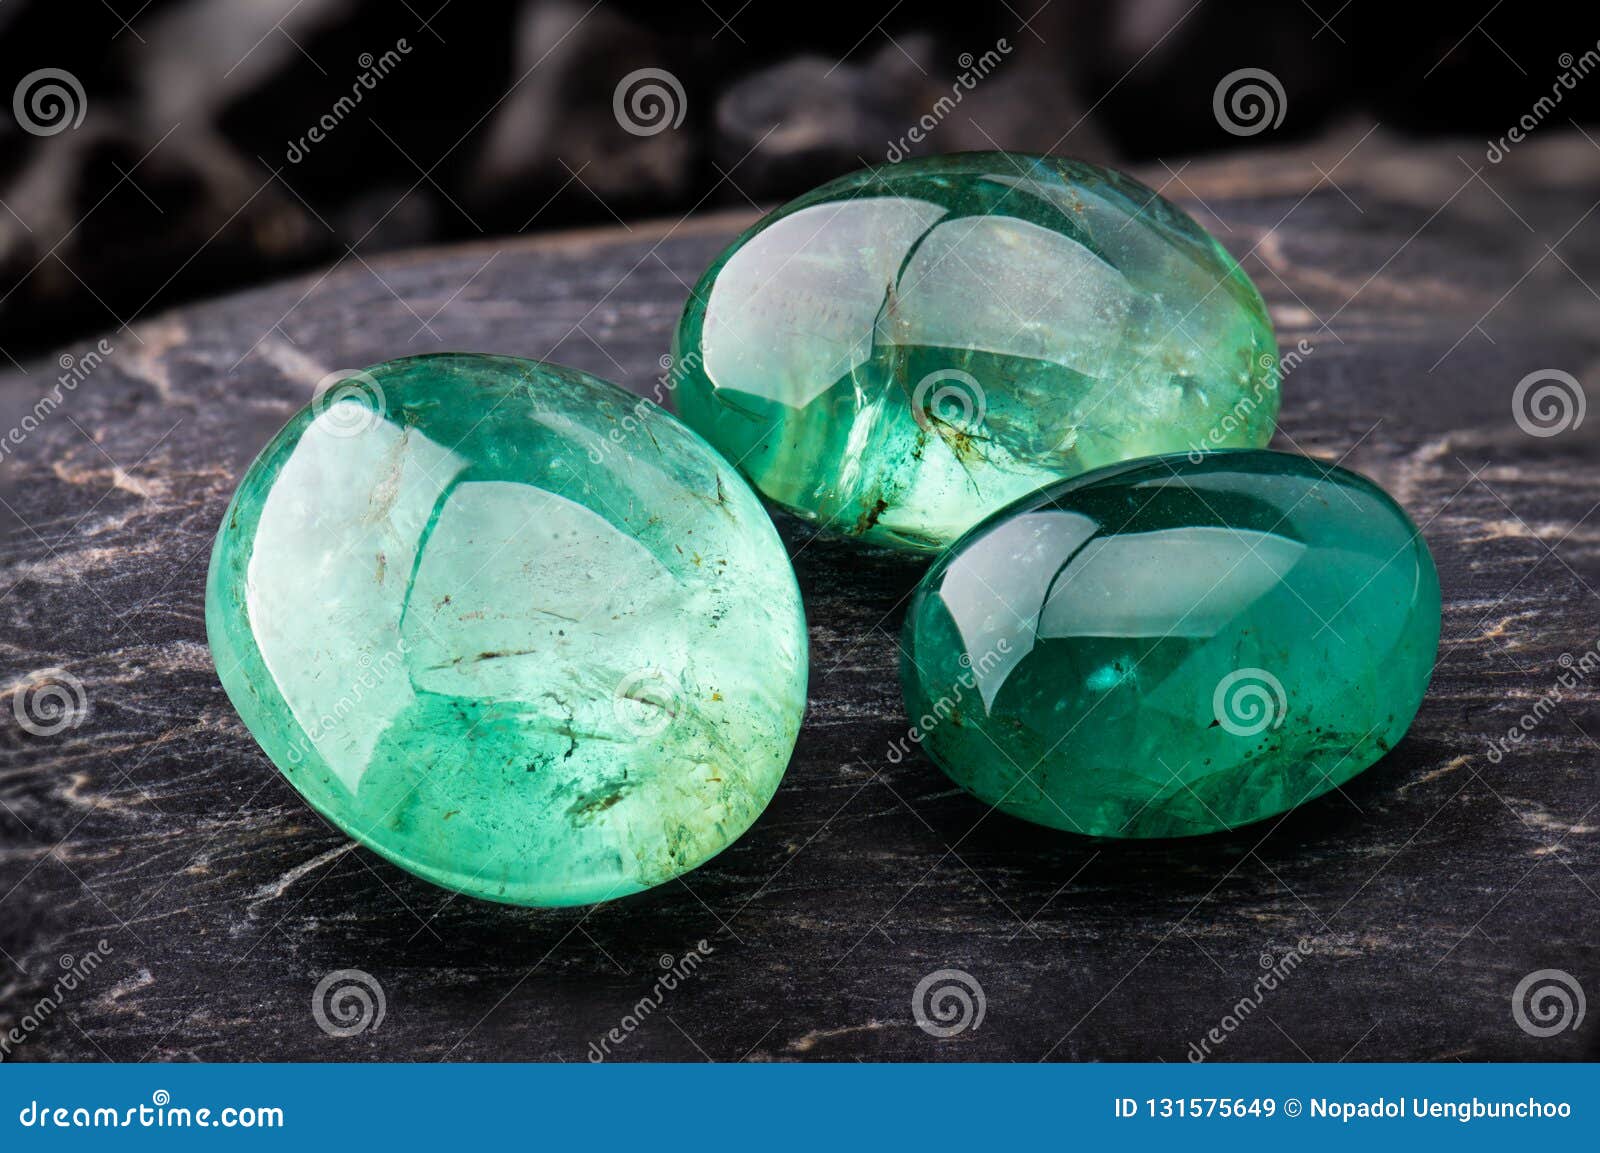 The Emerald Gemstone Jewelry Photo with Black Stones and Dark Lighting  Stock Image - Image of crystals, jewelry: 131575649